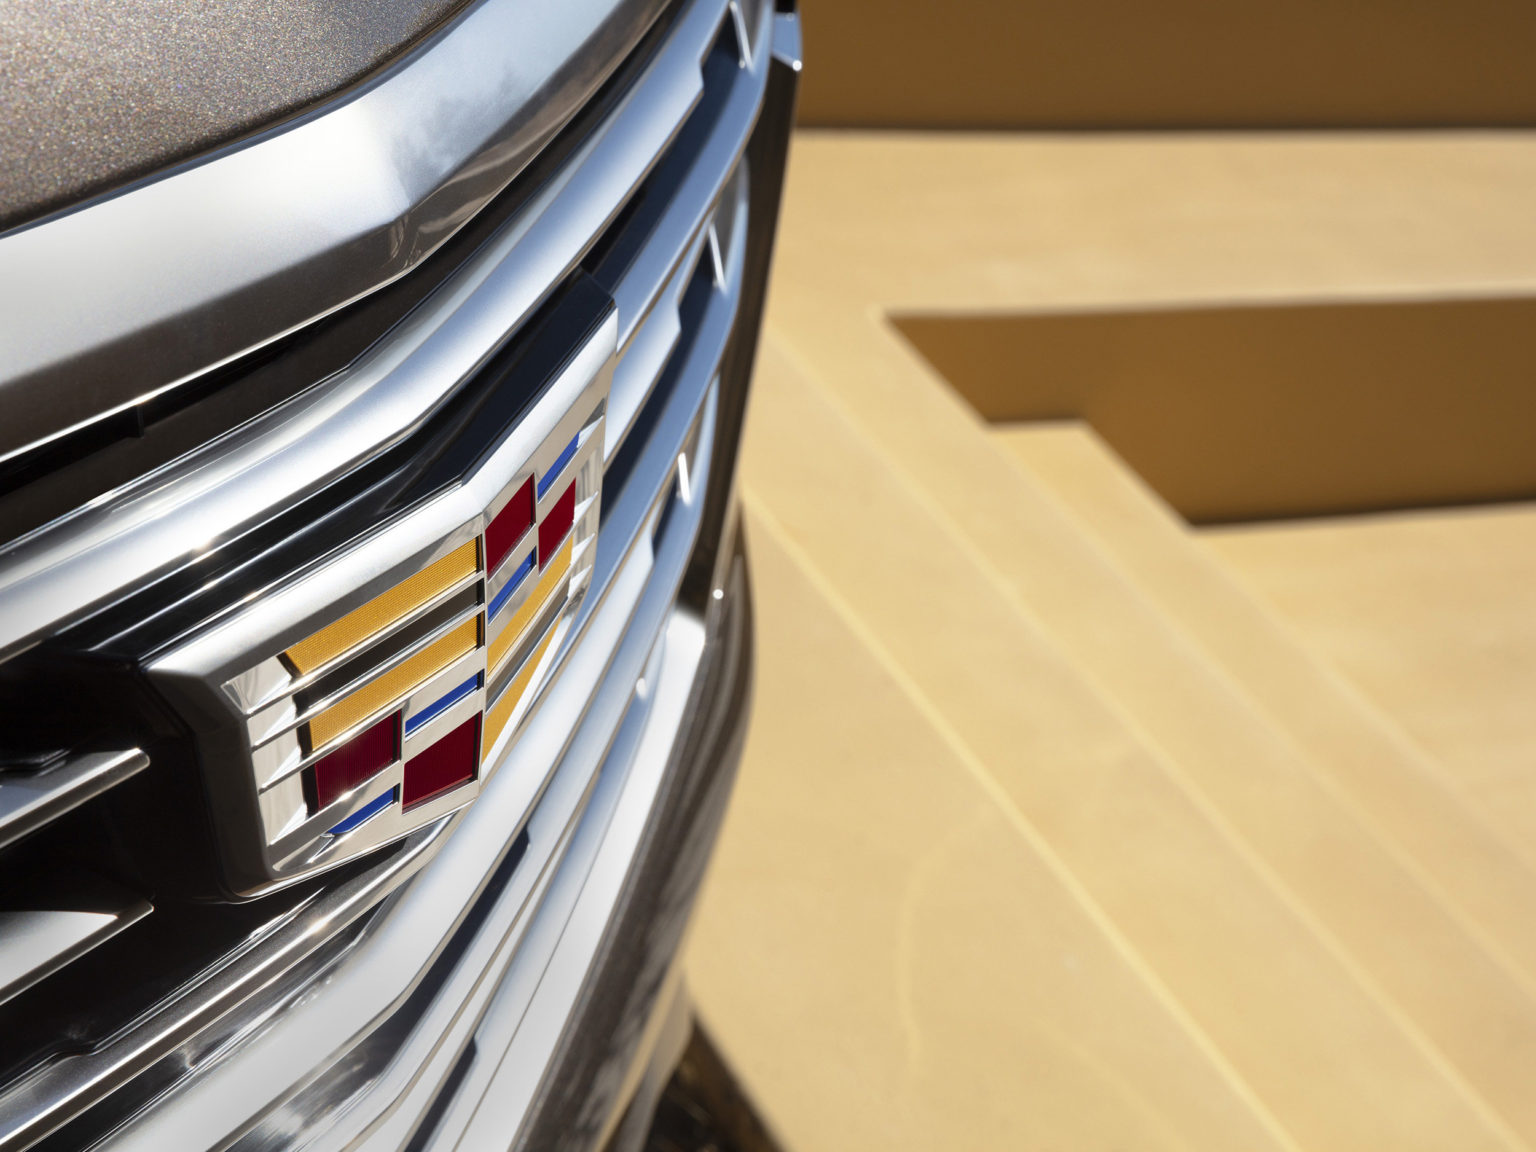 General Motors has confirmed that an all-electric Escalade is in the works.